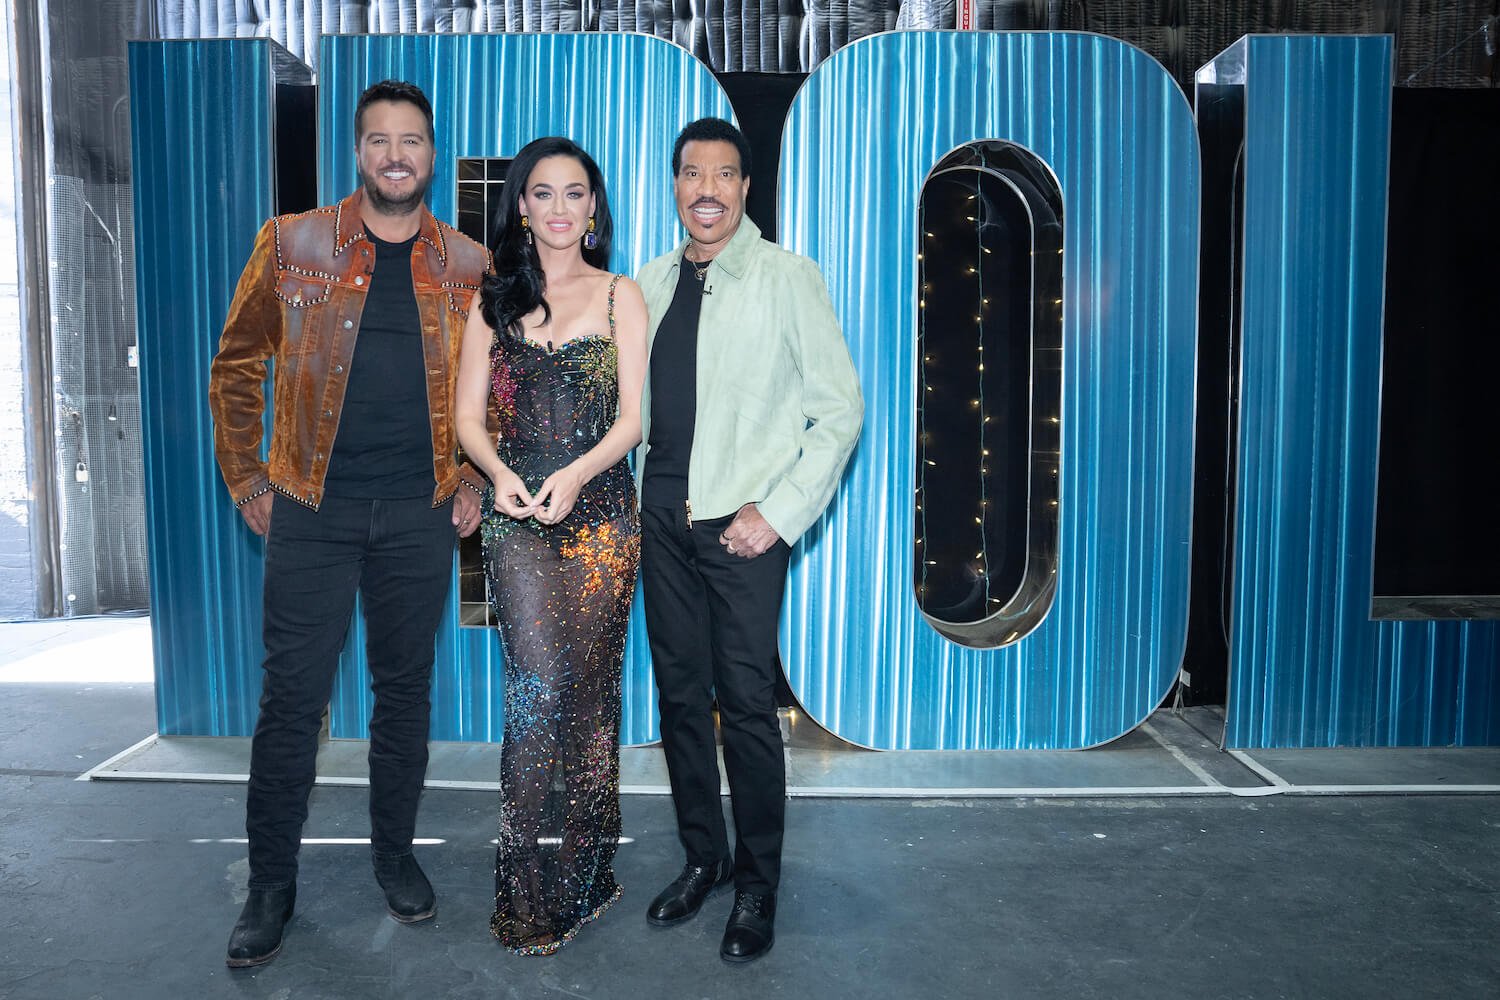 'American Idol' 2023 judges Luke Bryan, Katy Perry, and Lionel Richie standing next to each other and smiling